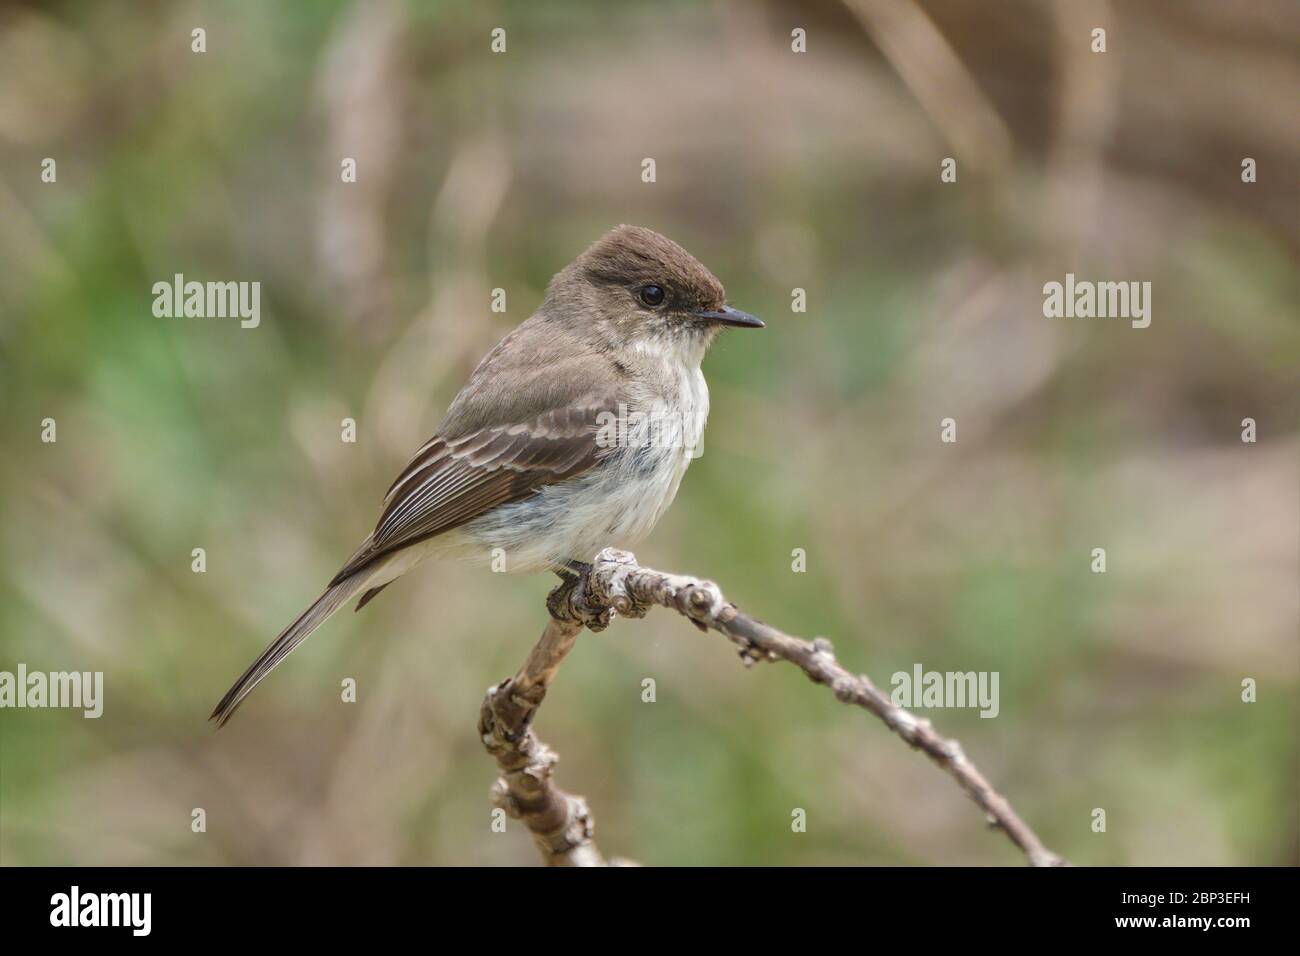 and Eastern Phoebe, Sayornis phoebe, perches on a branch in a wooded area in Orillia Ontario Canada. Stock Photo